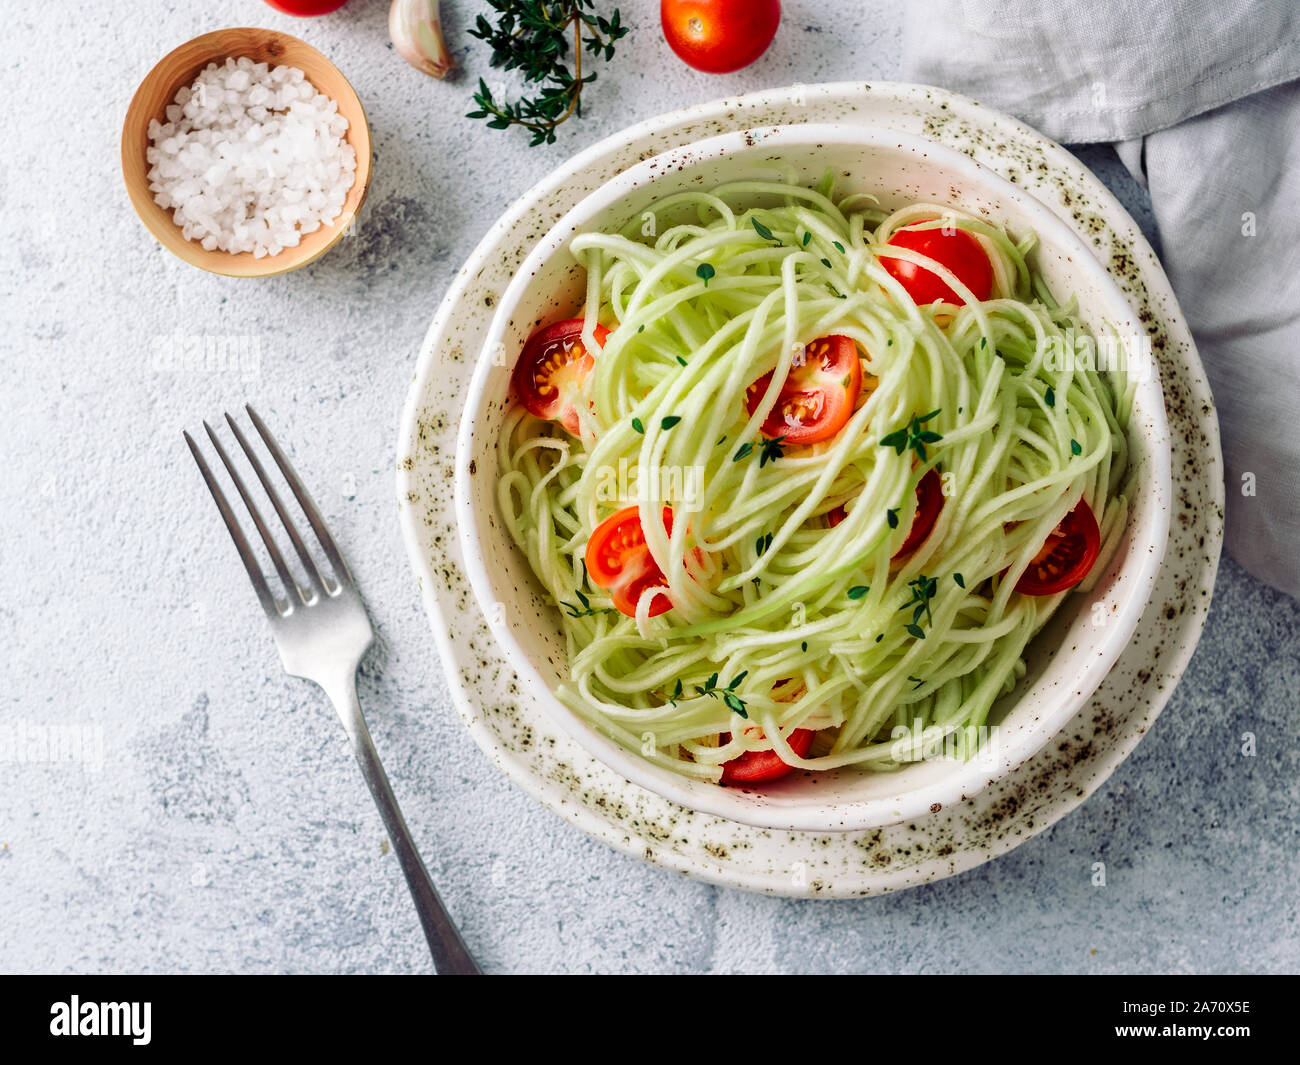 Zucchini noodles salad with cherry tomatoes. Vegetable noodles - green zoodles or courgette spaghetti salad ready-to-eat. Clean eating, raw vegetarian food concept. Copy space. Top view or flat lay. Stock Photo